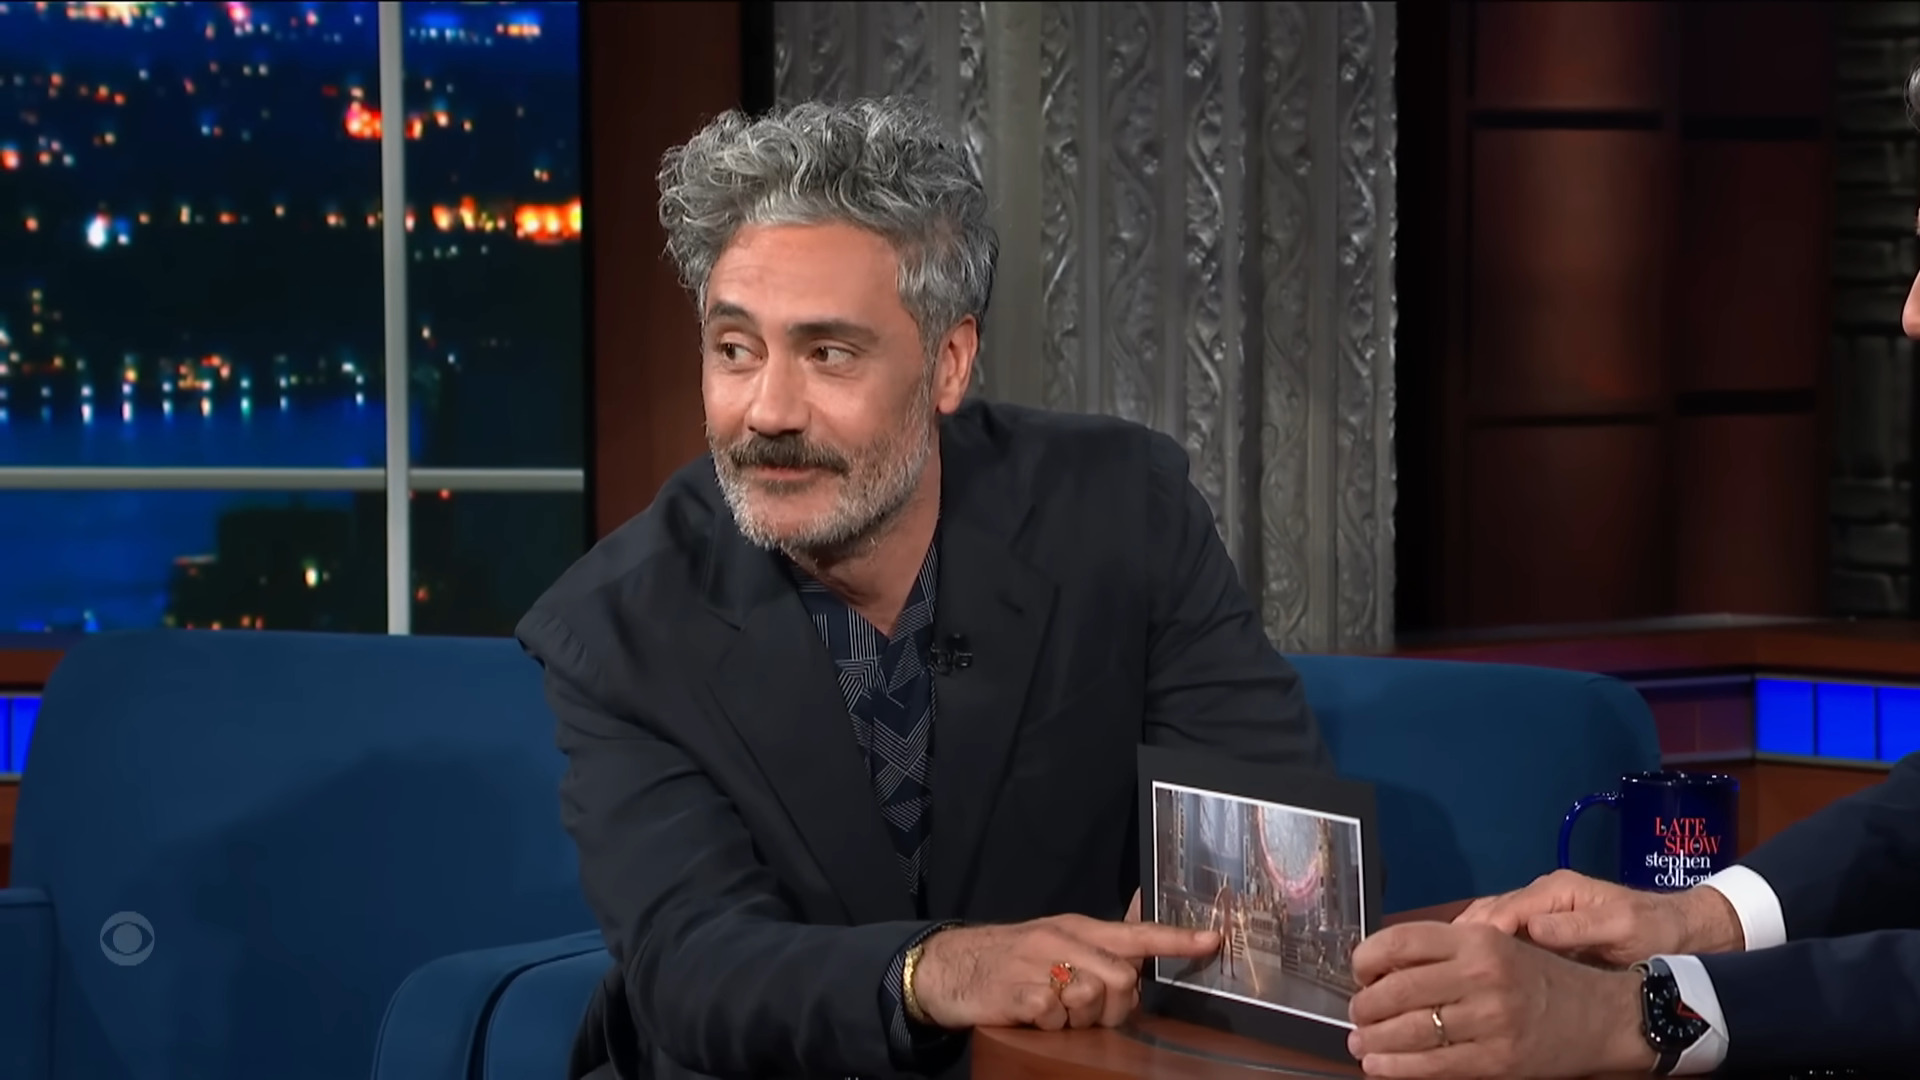 Taika Waititi proudly boasts about featuring a shot of Chris Hemsworth bare body in Thor: Love and Thunder to Stephen Colbert on The Late Show with Stephen Colbert